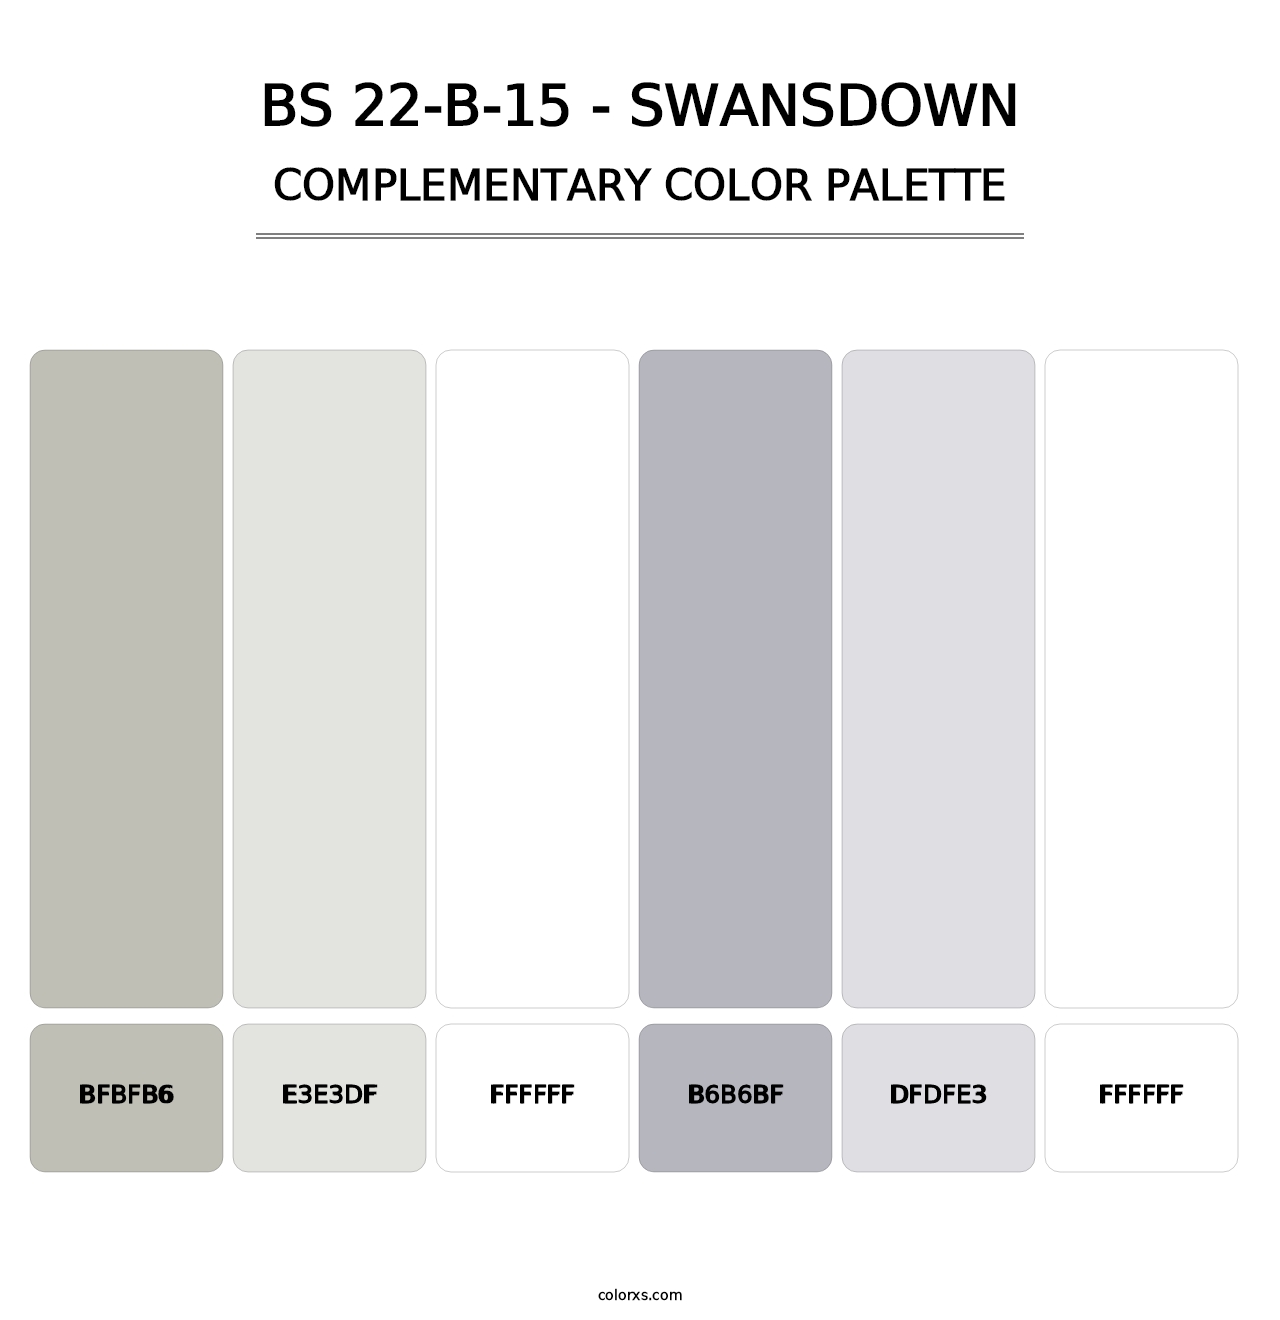 BS 22-B-15 - Swansdown - Complementary Color Palette